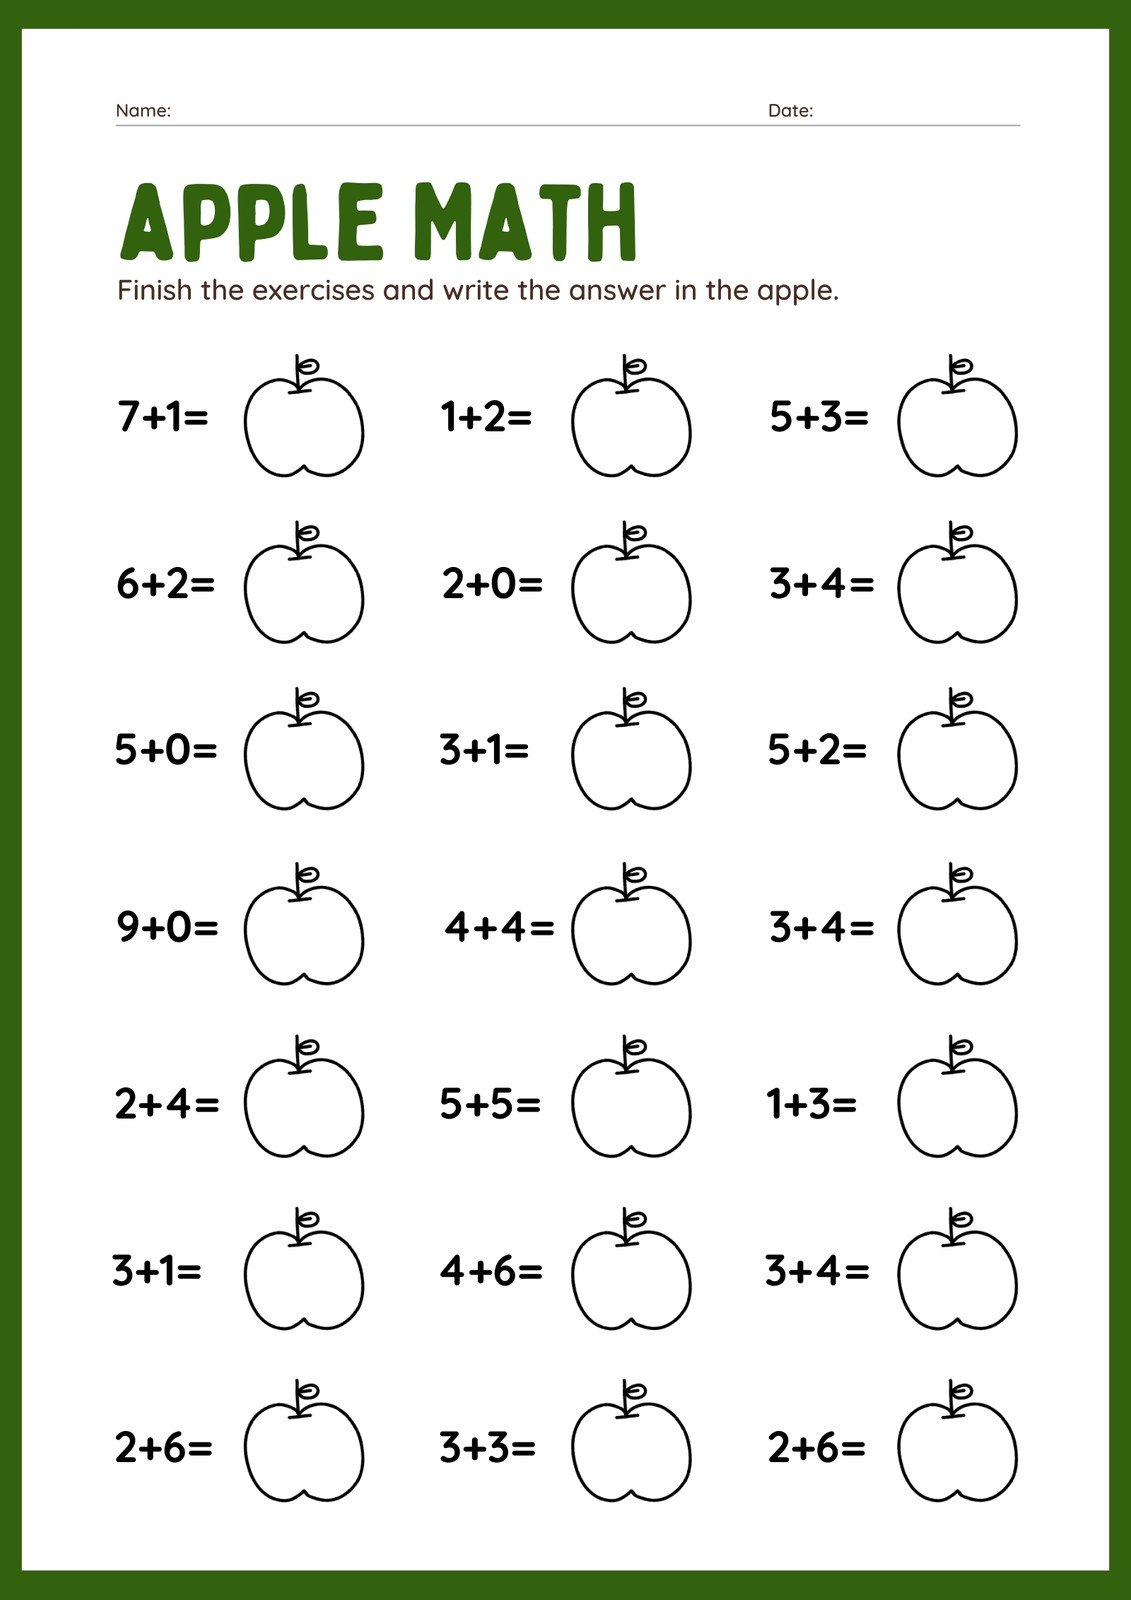 Free 1St Grade Math Worksheet Templates To Customize | Canva inside Free Printable Addition Worksheets For 1St Grade